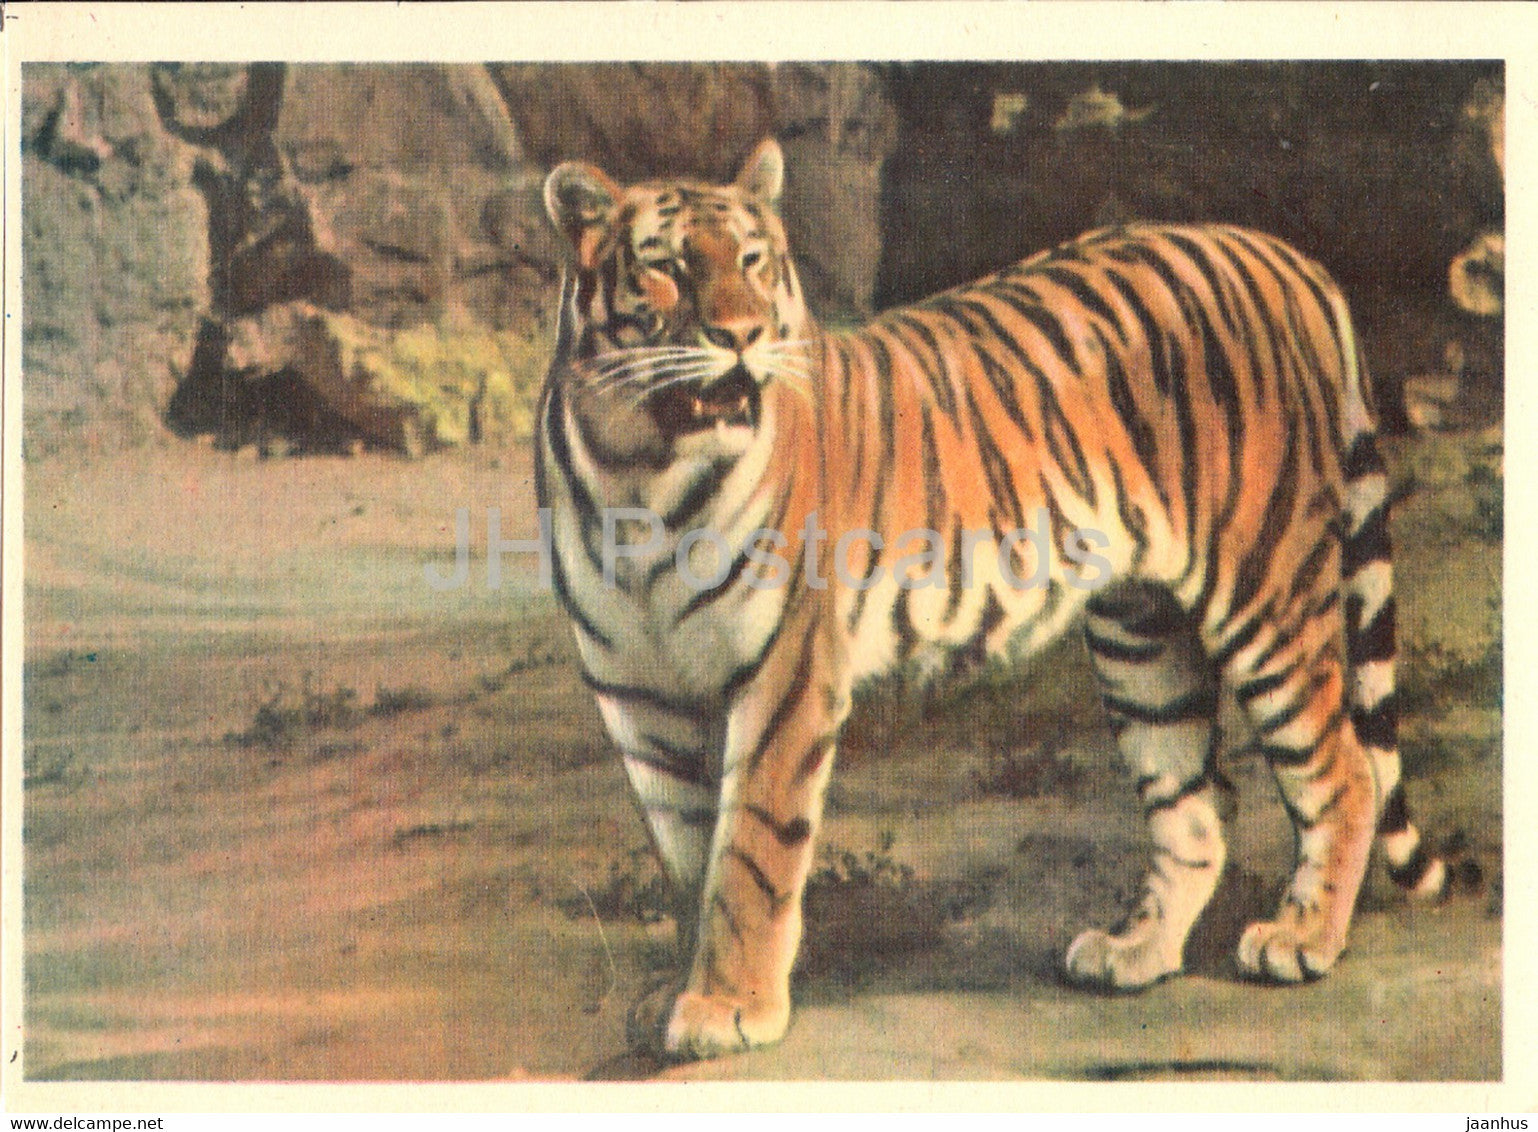 Siberian Tiger - Panthera tigris altaica - Moscow Zoo - 1963 - Russia USSR - unused - JH Postcards